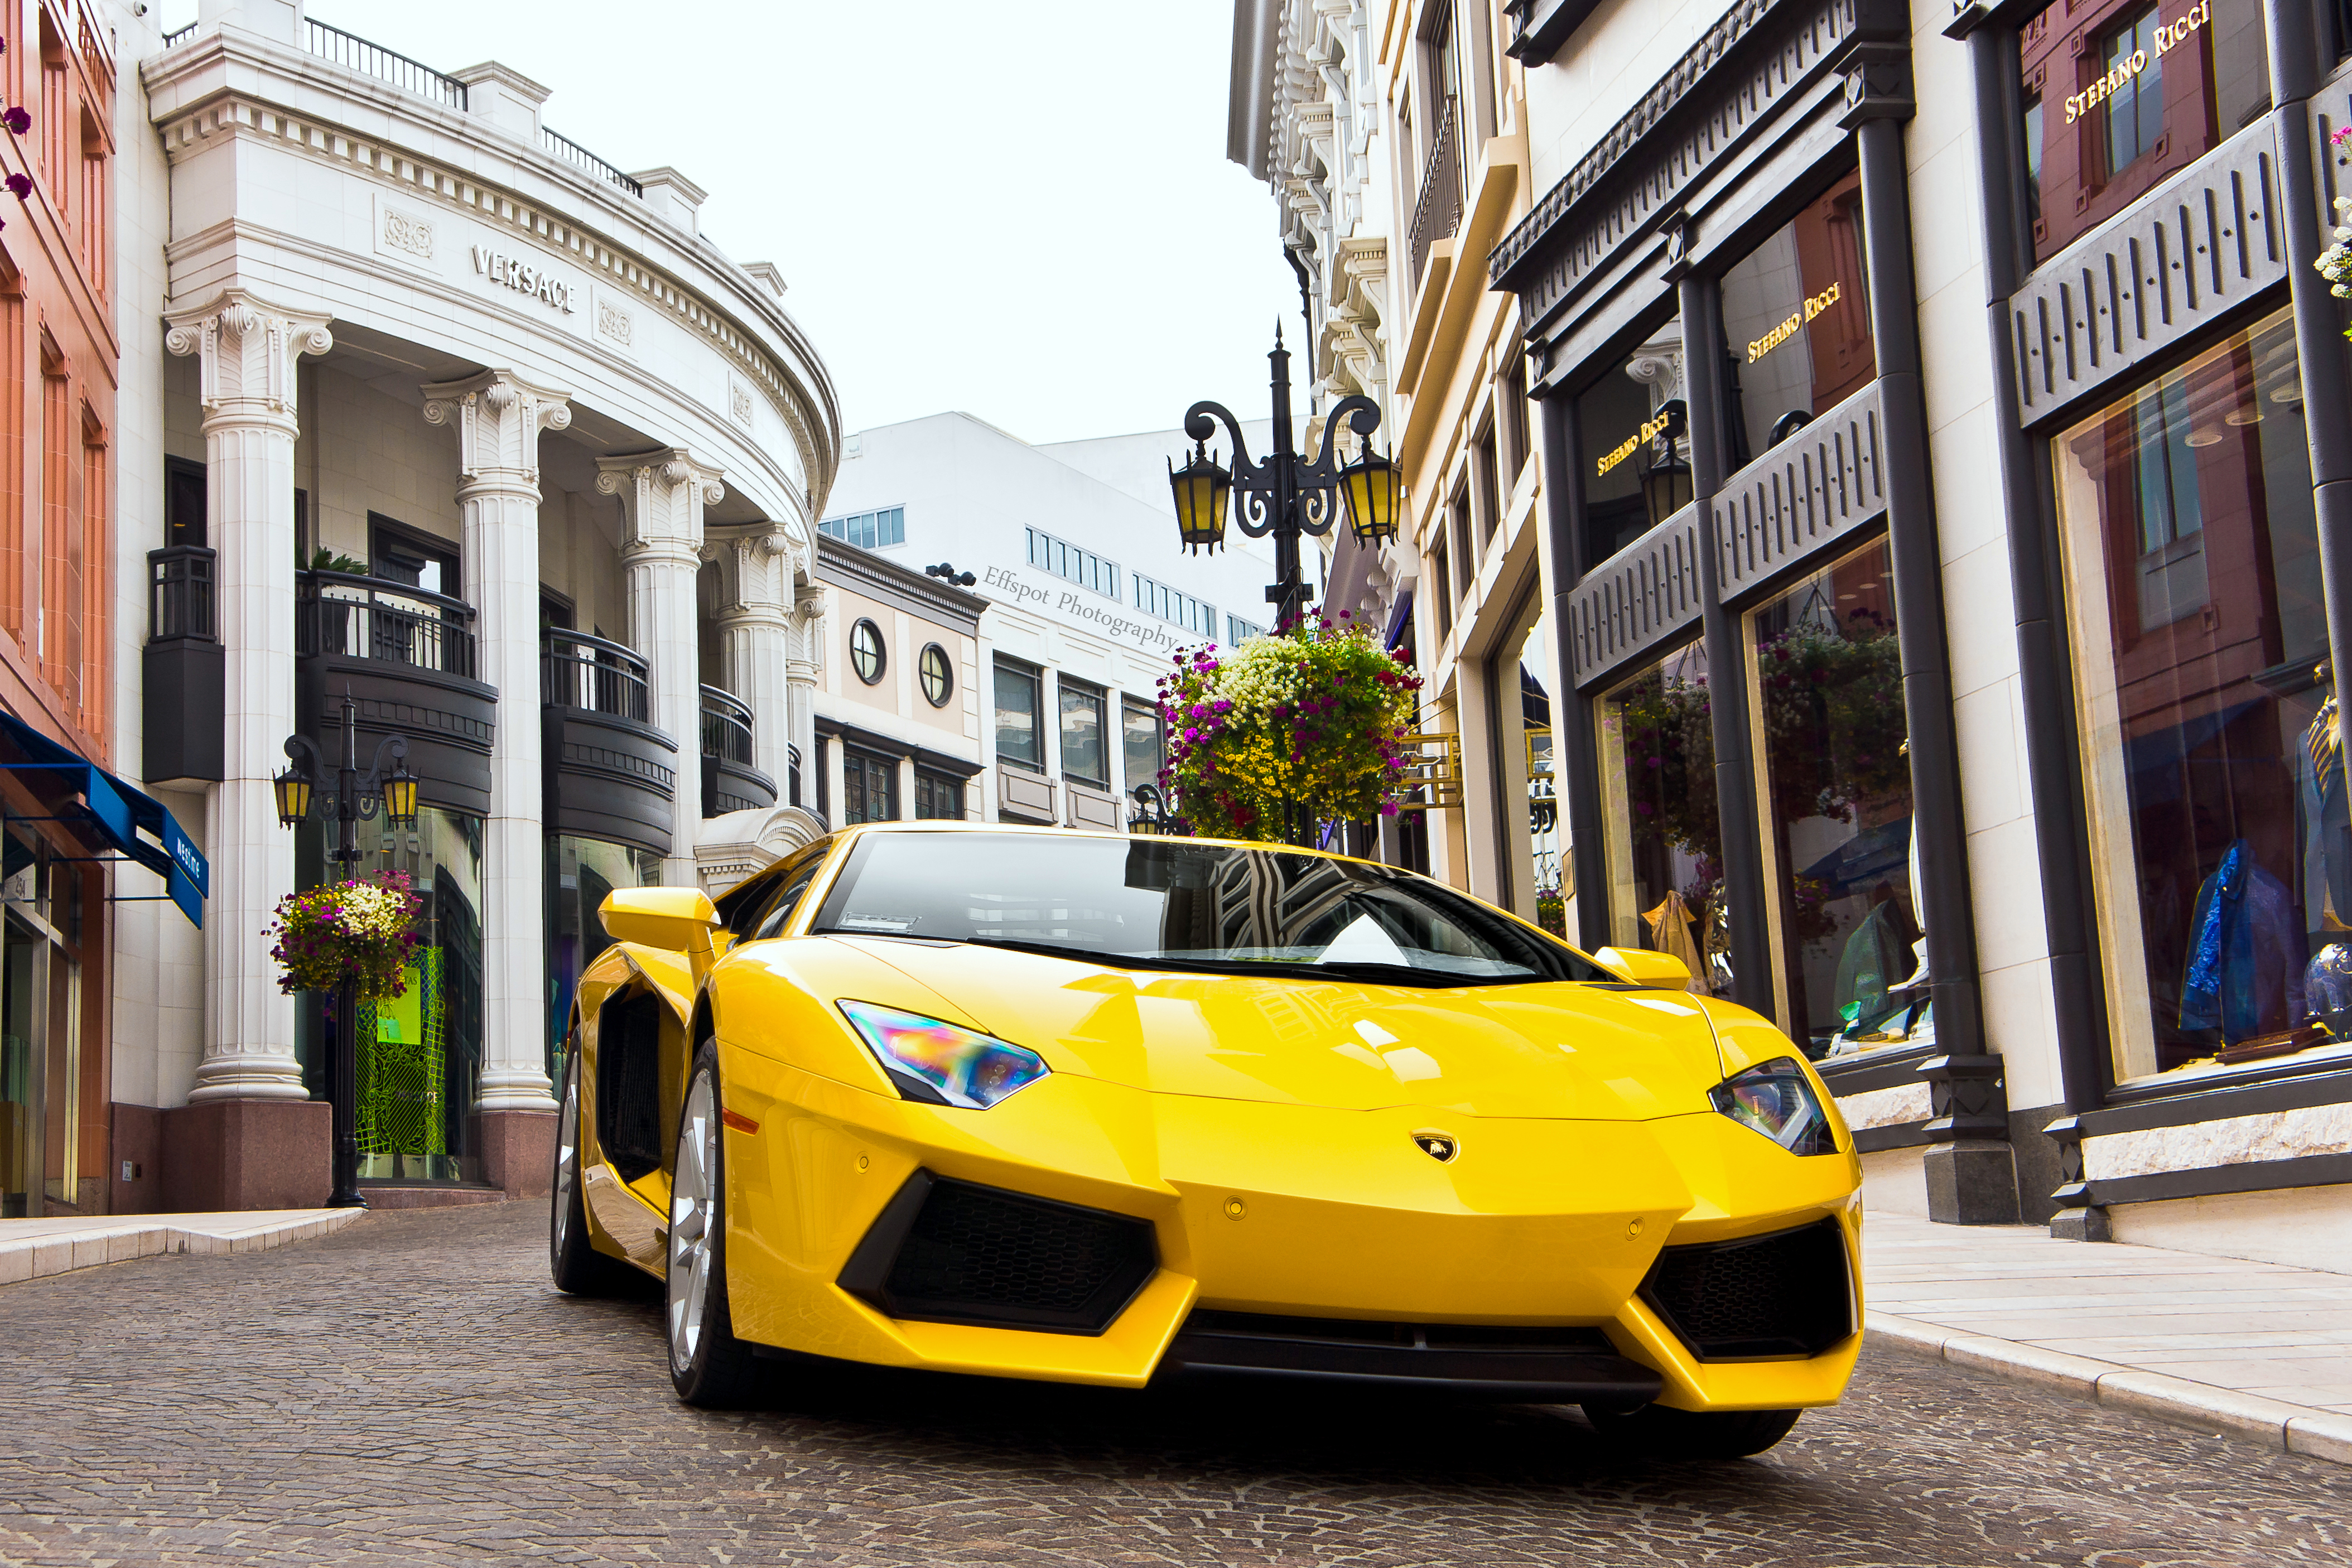 Tamed Bull on Rodeo Drive Flickr   Photo Sharing